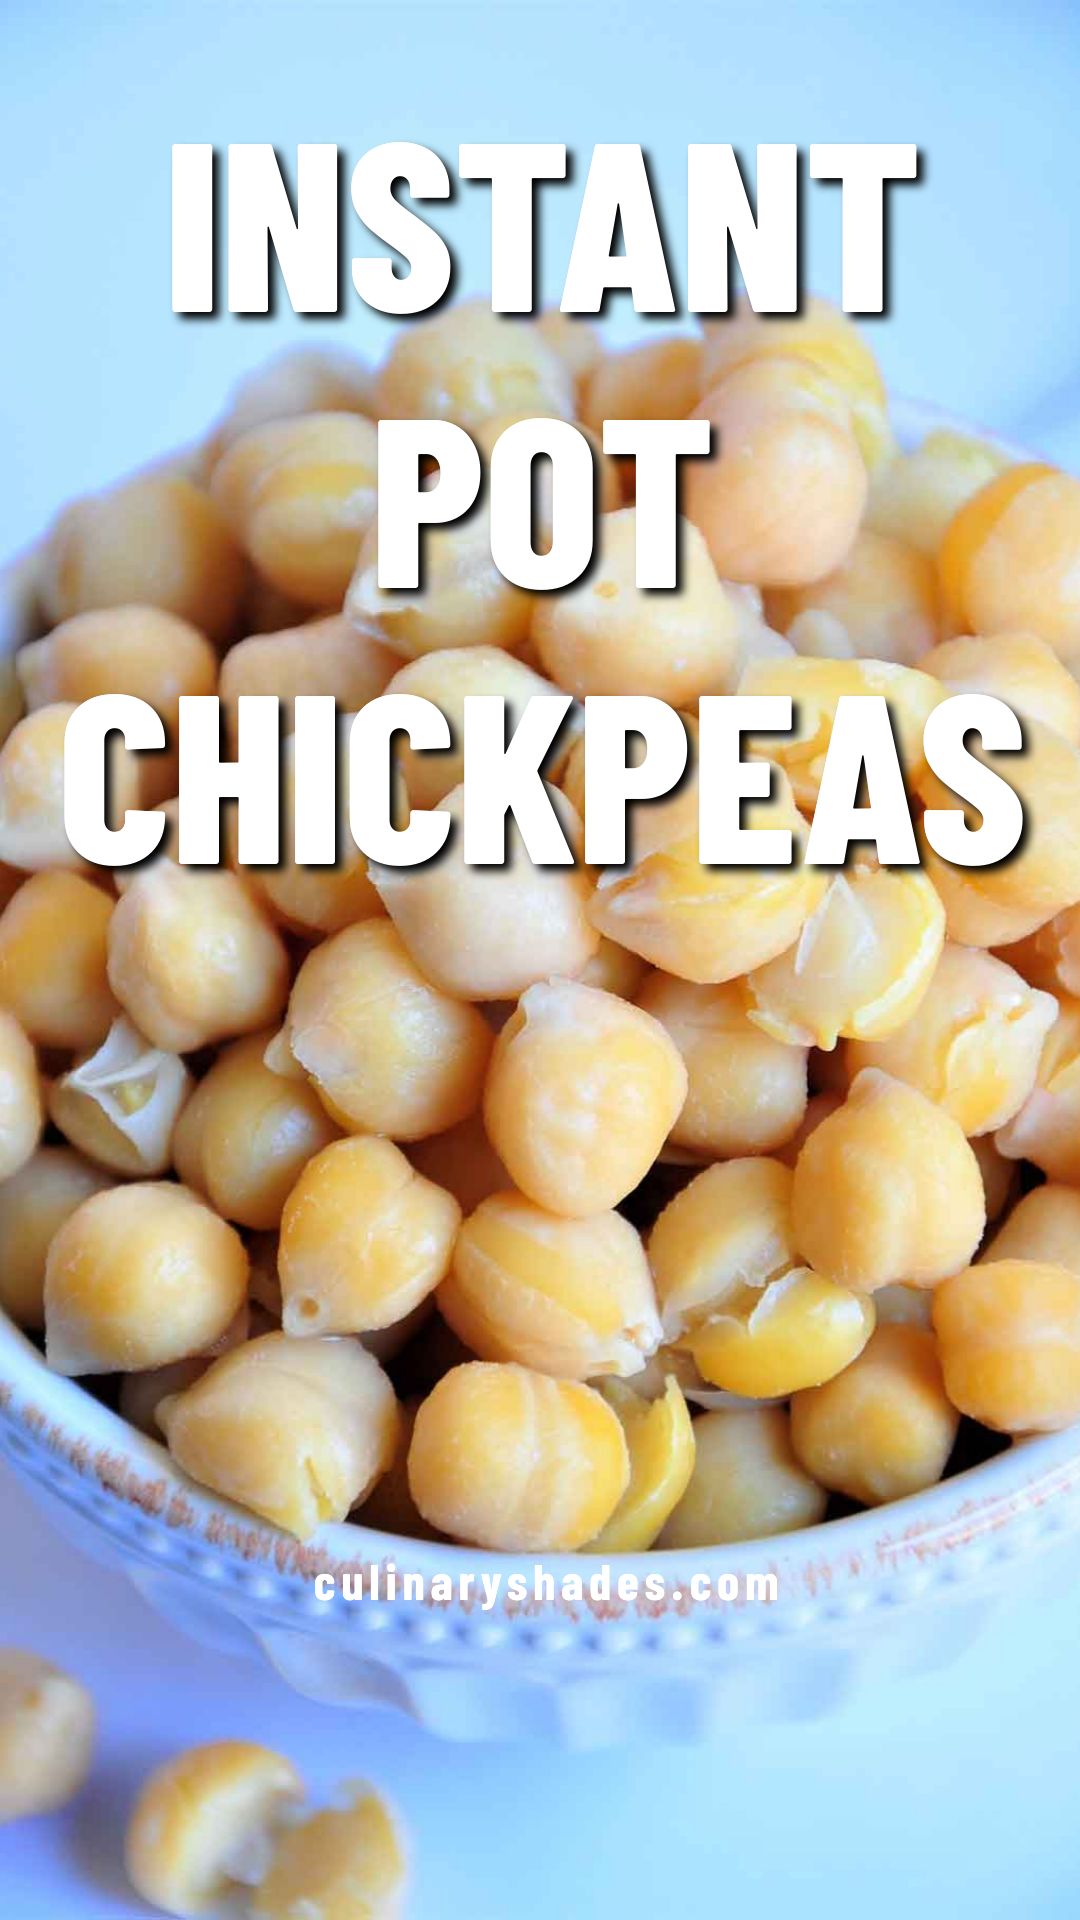 Instant pot chickpeas pin